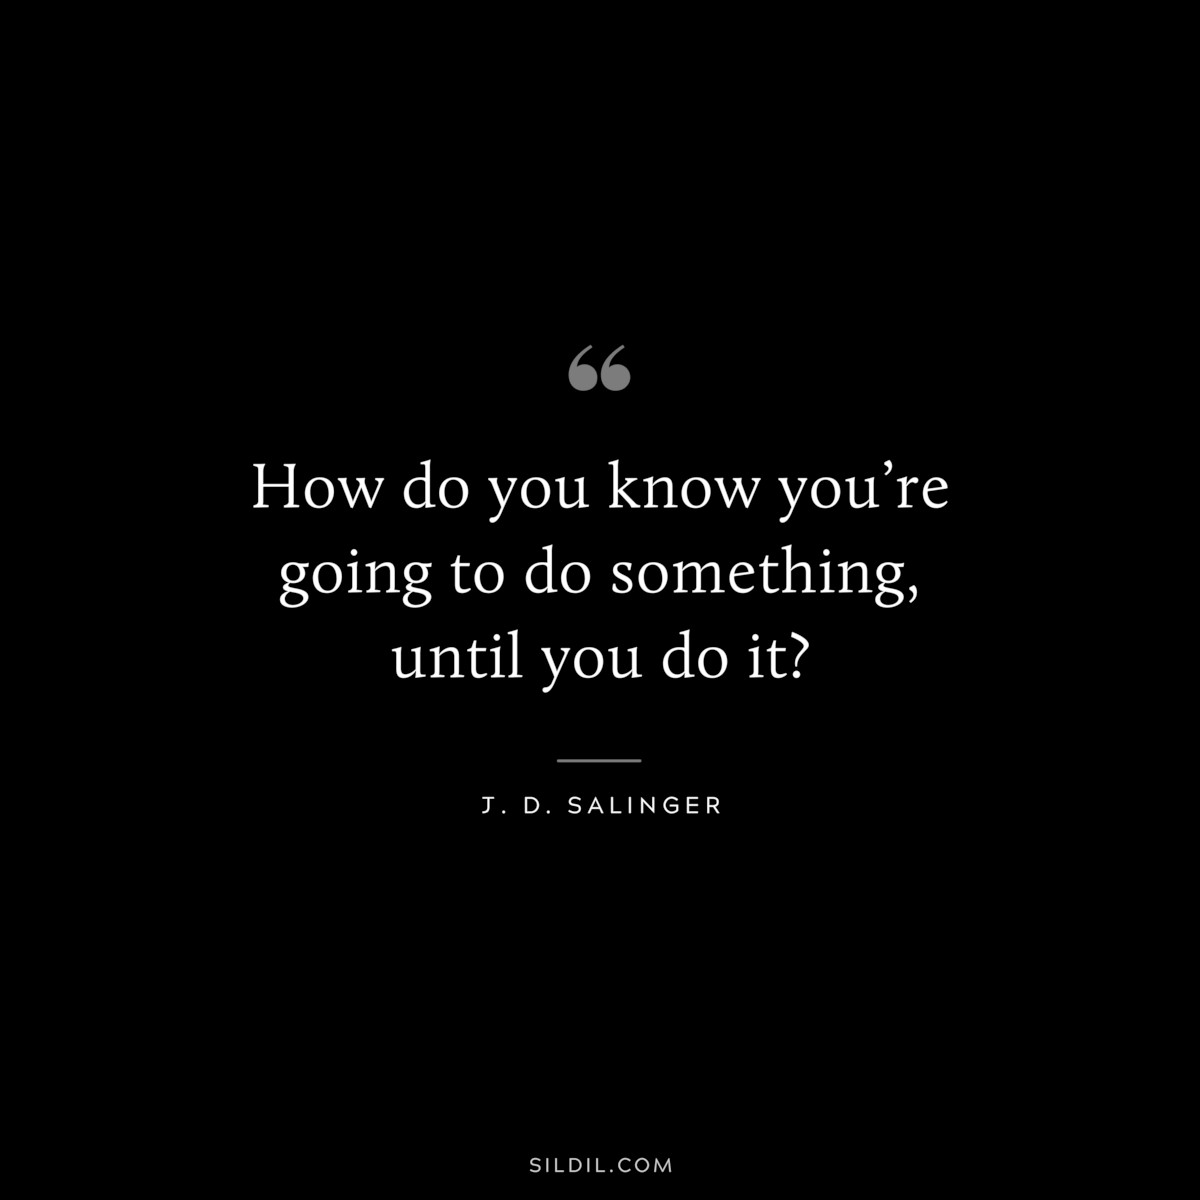 How do you know you’re going to do something, until you do it? — J. D. Salinger